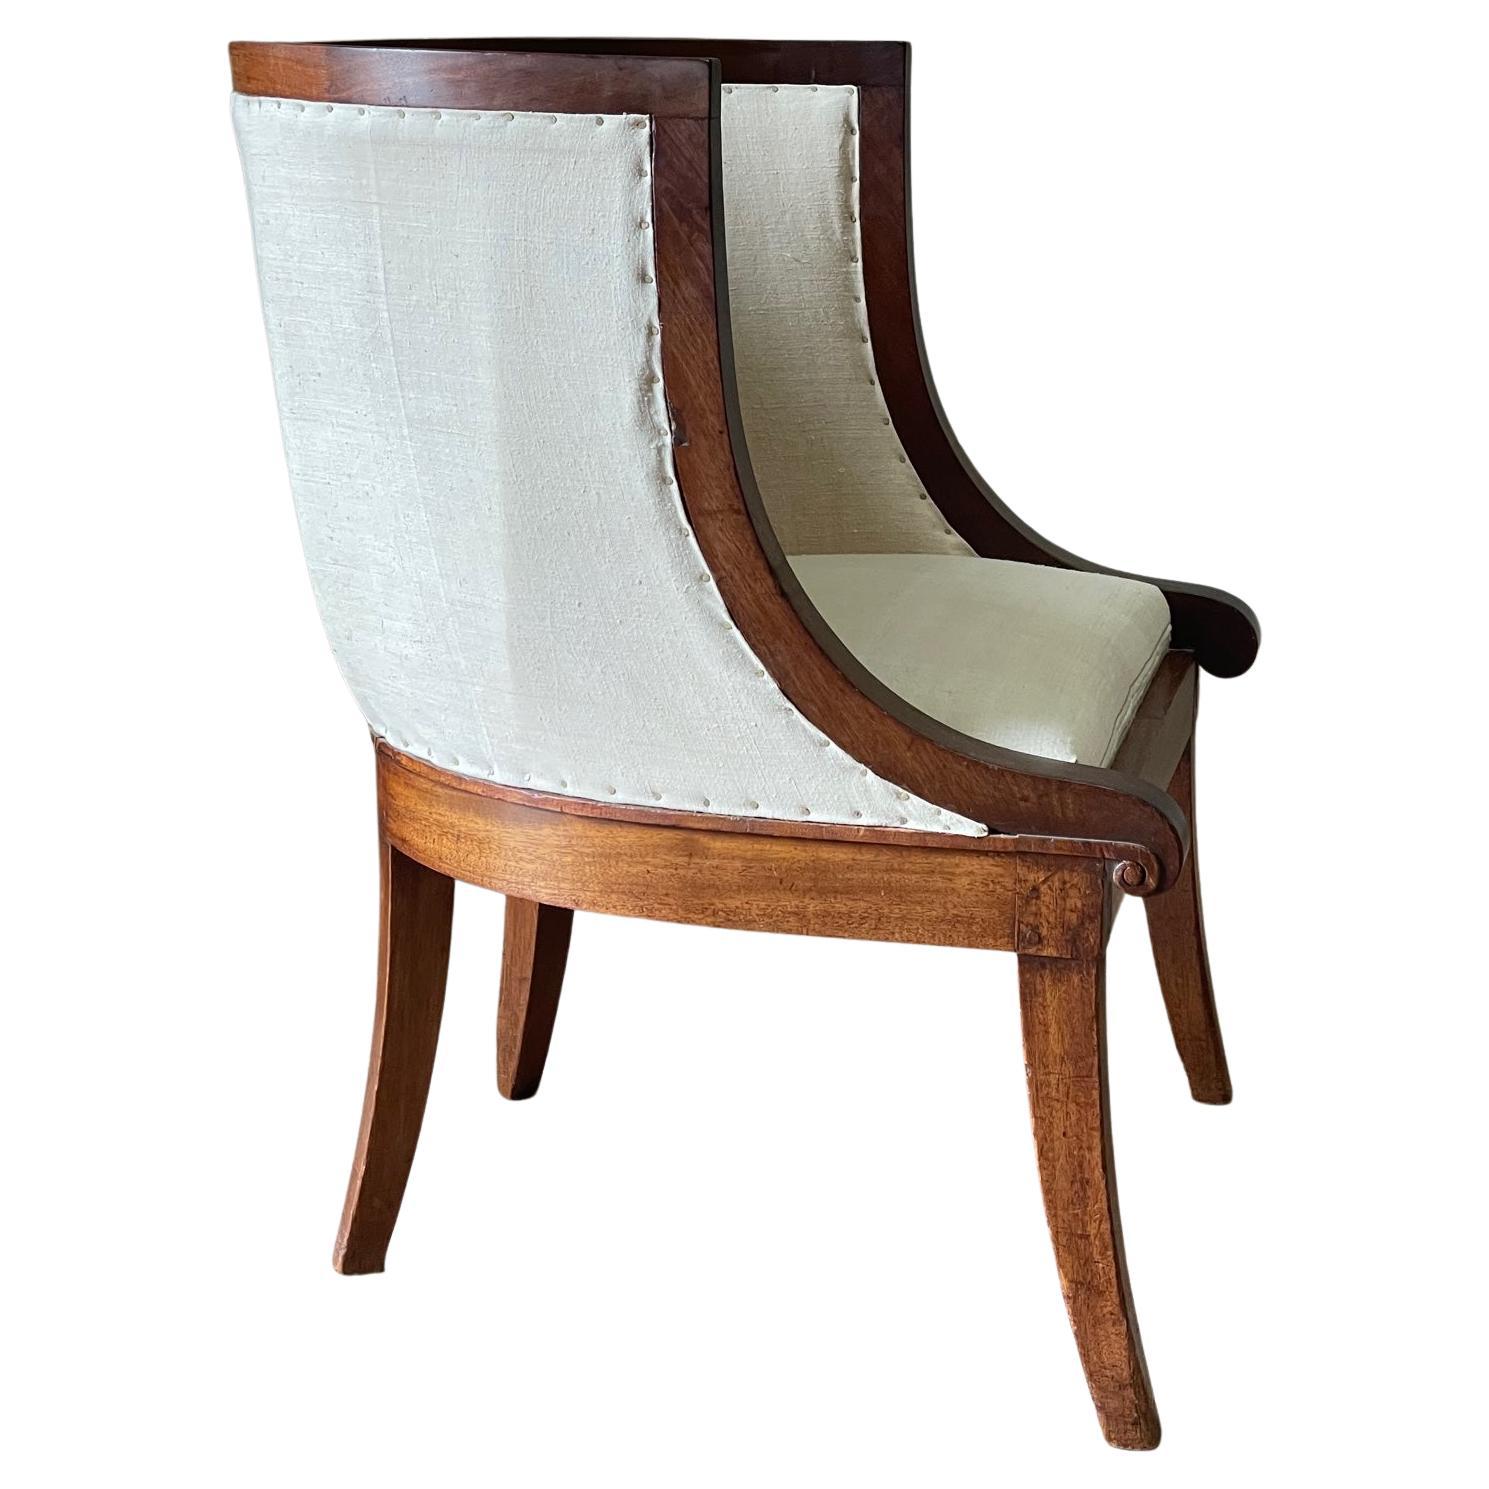 19th century French Empire single barrel back chair.
Mahogany wood.
Newly reupholstered in vintage linen with nail head finish.
ARRIVING AUGUST.